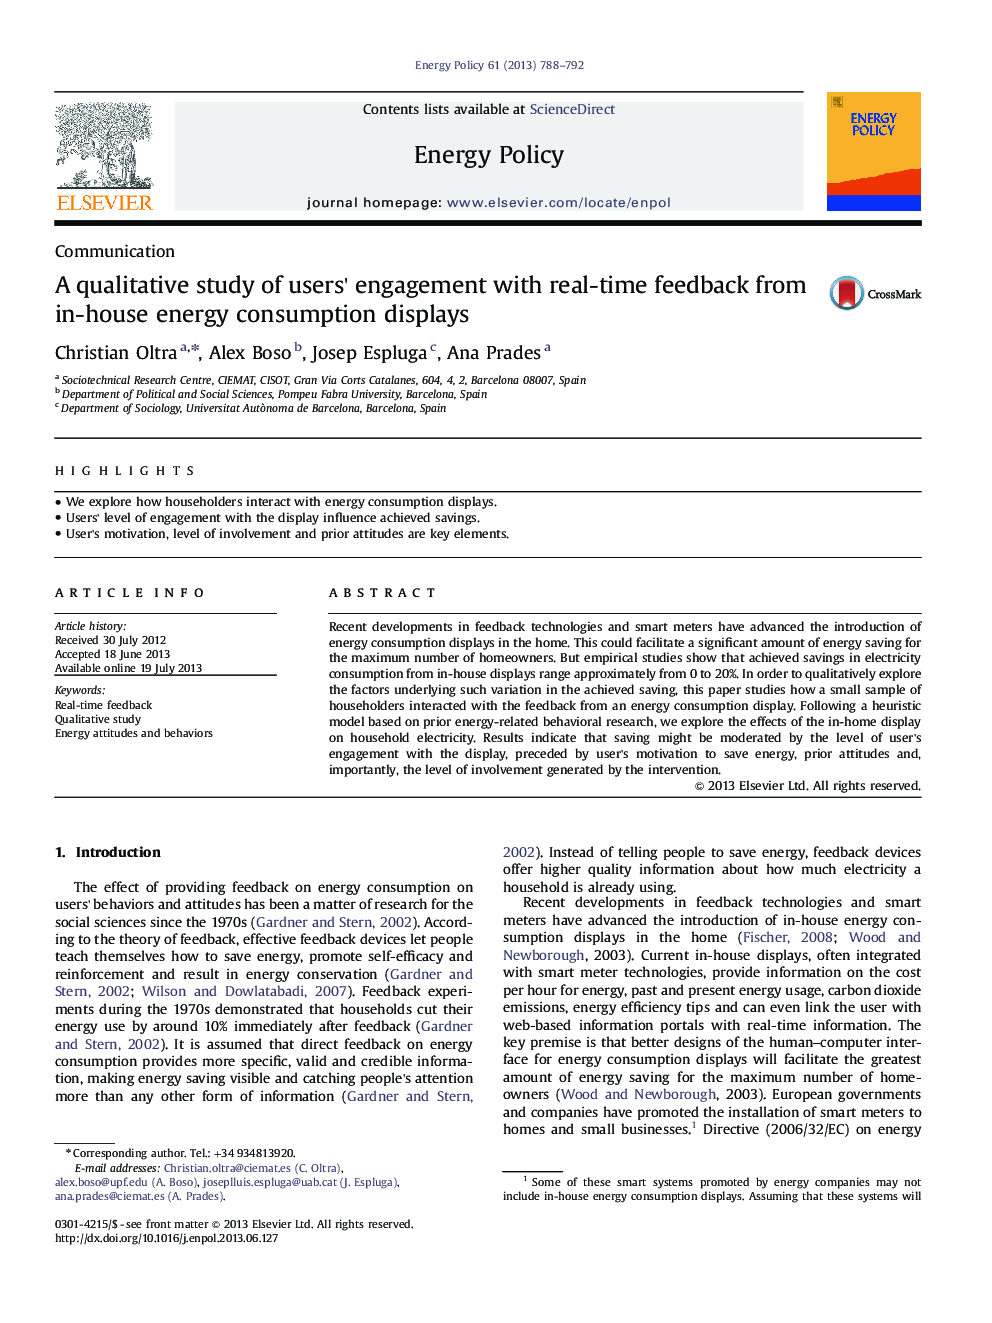 A qualitative study of users' engagement with real-time feedback from in-house energy consumption displays